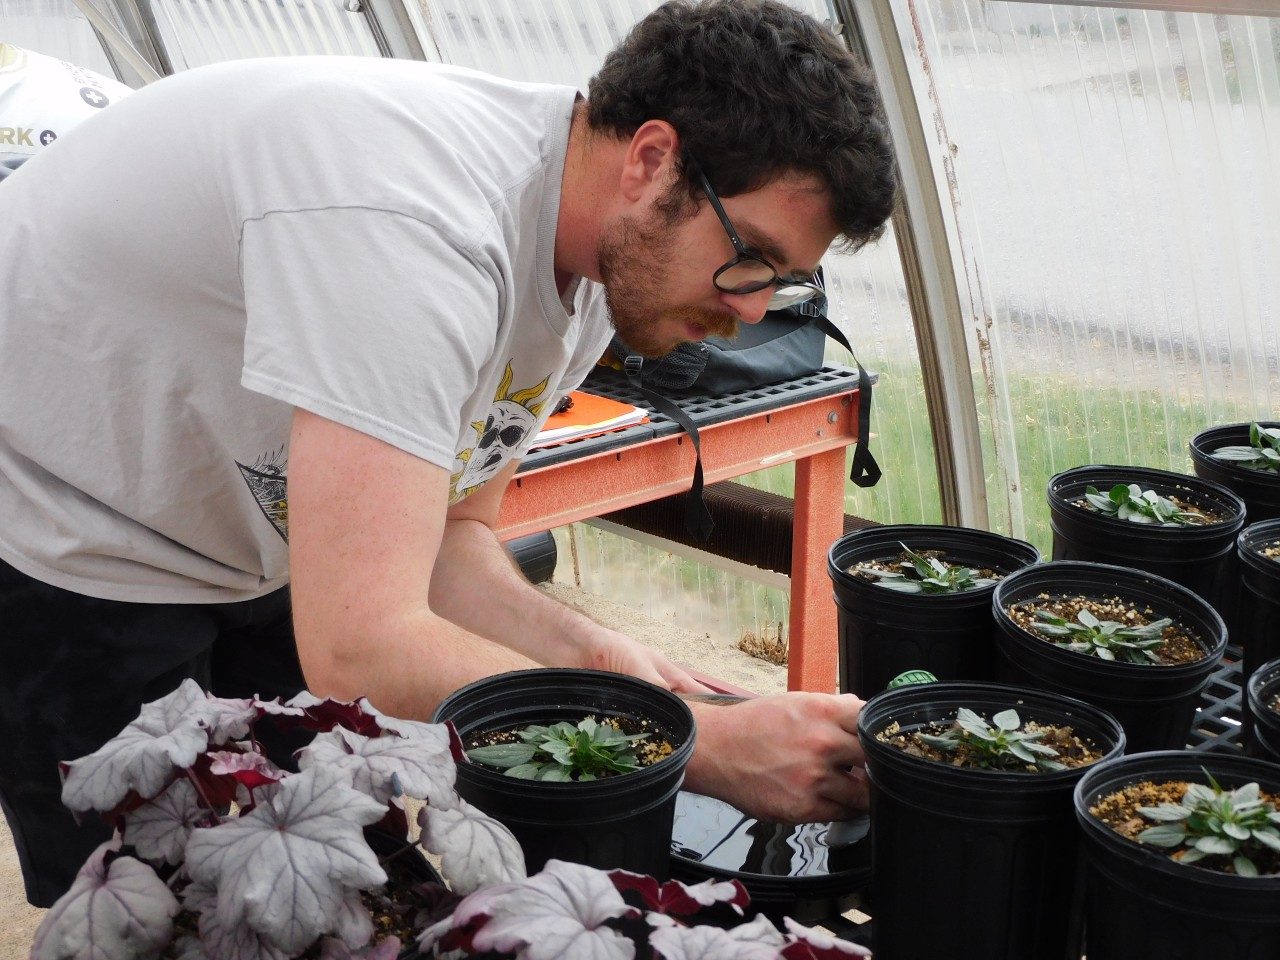 Students in the Ornamental Plant Production and Marketing course prepare the greenhouse for the annual plant sale.